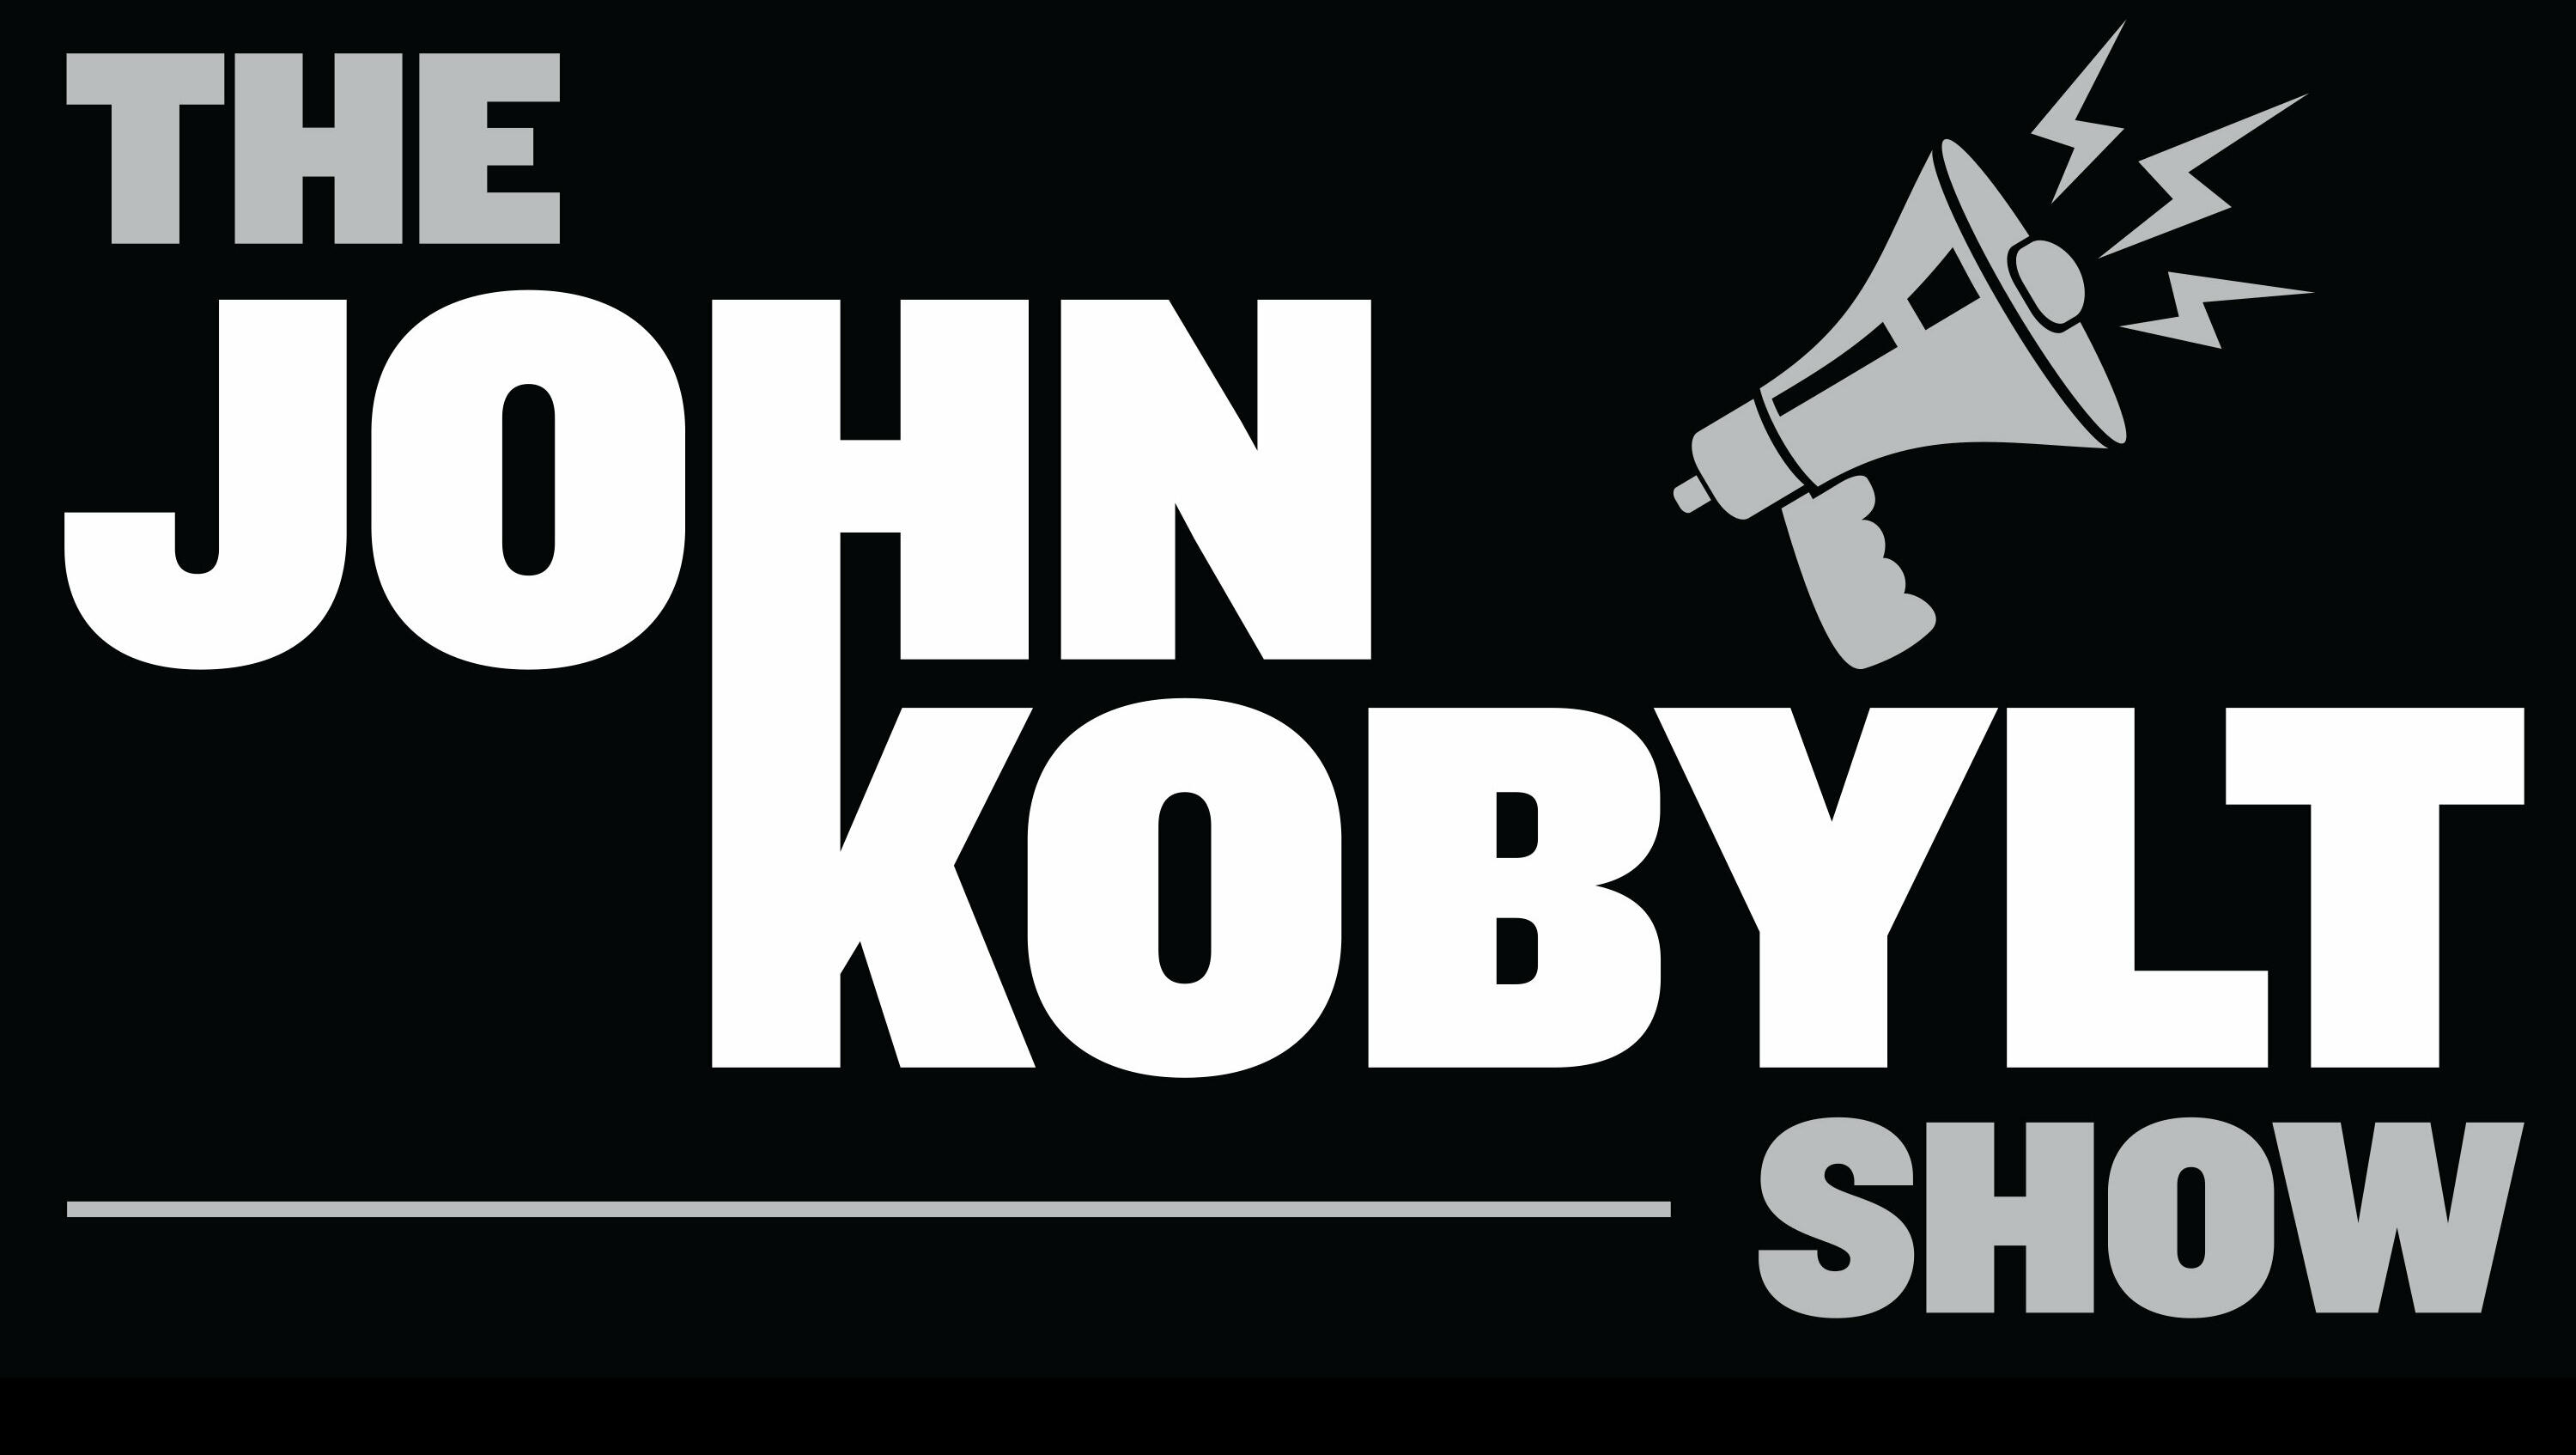 The John Kobylt Show Hour 1 (06/07) - CA Dems fight the fix for Prop 47